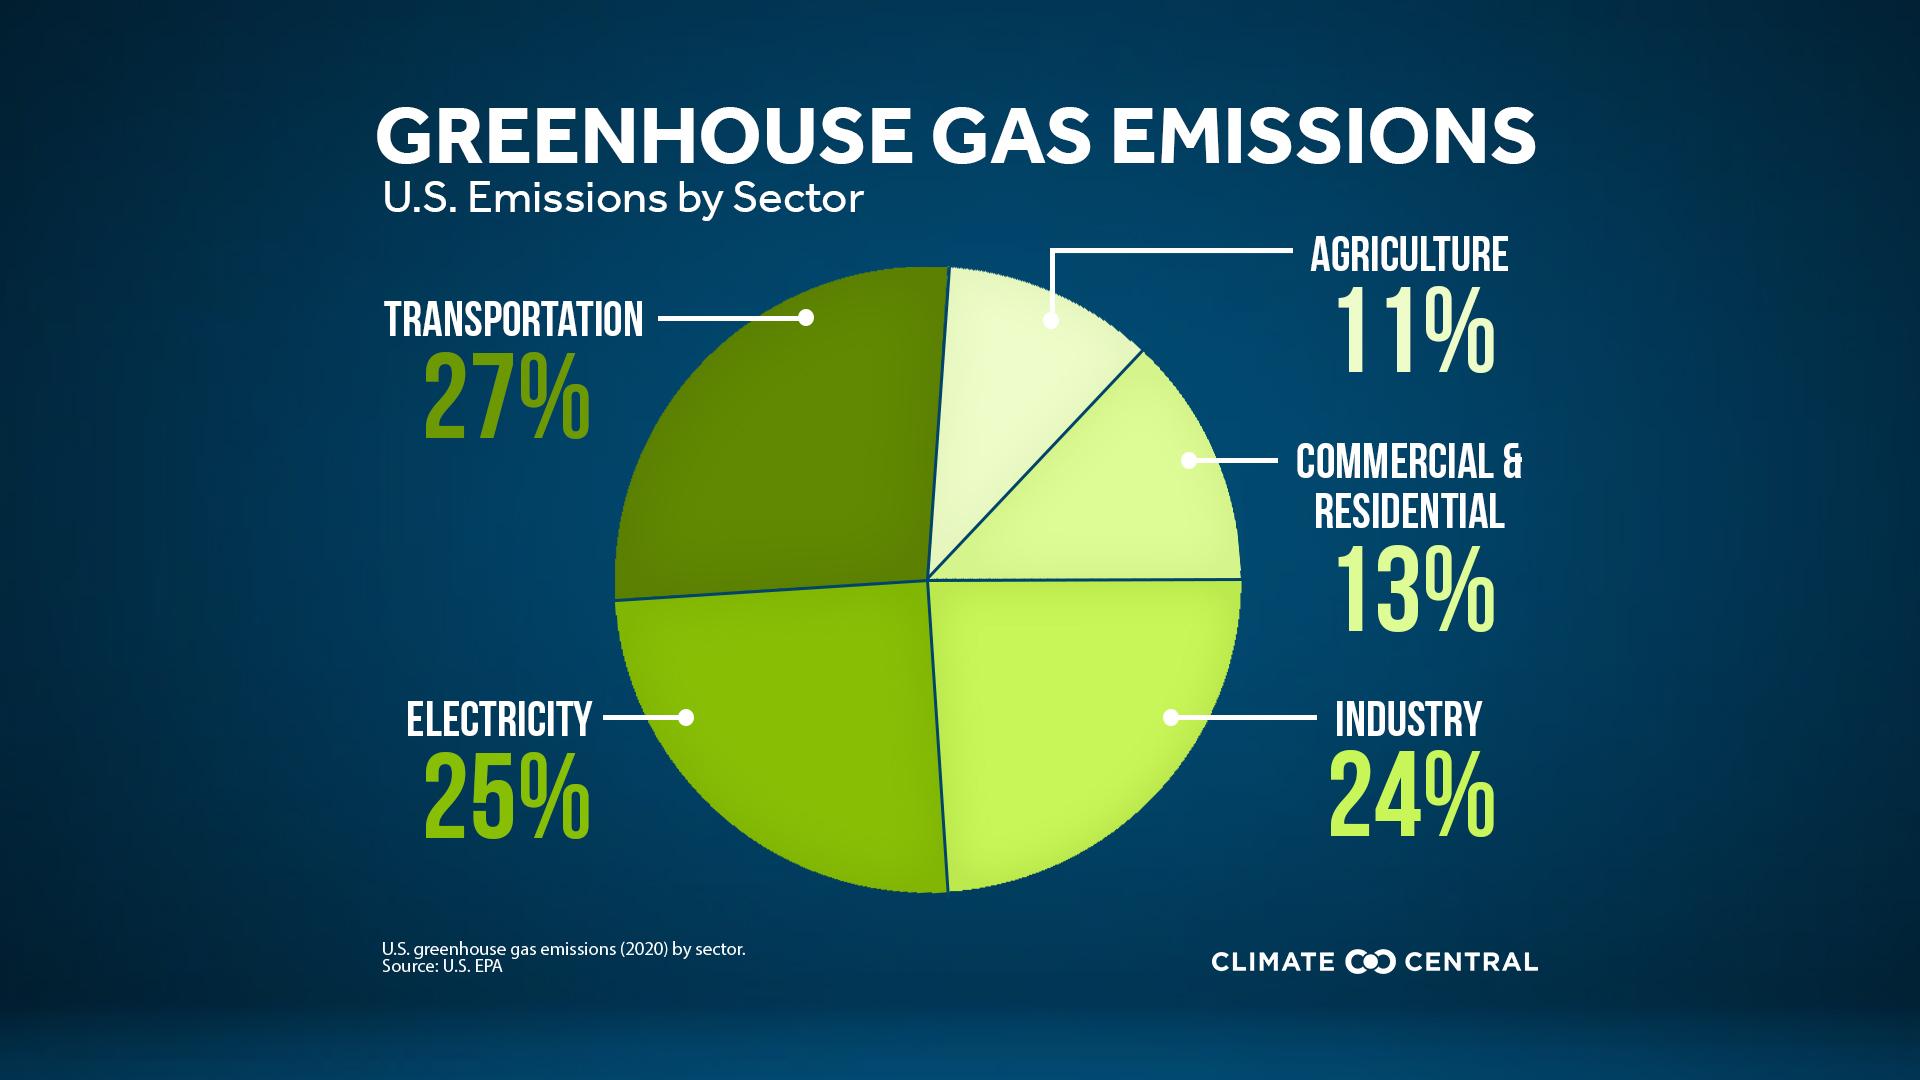 U.S. Emissions by Sector (2020) - Peak CO2 & Heat-trapping Emissions